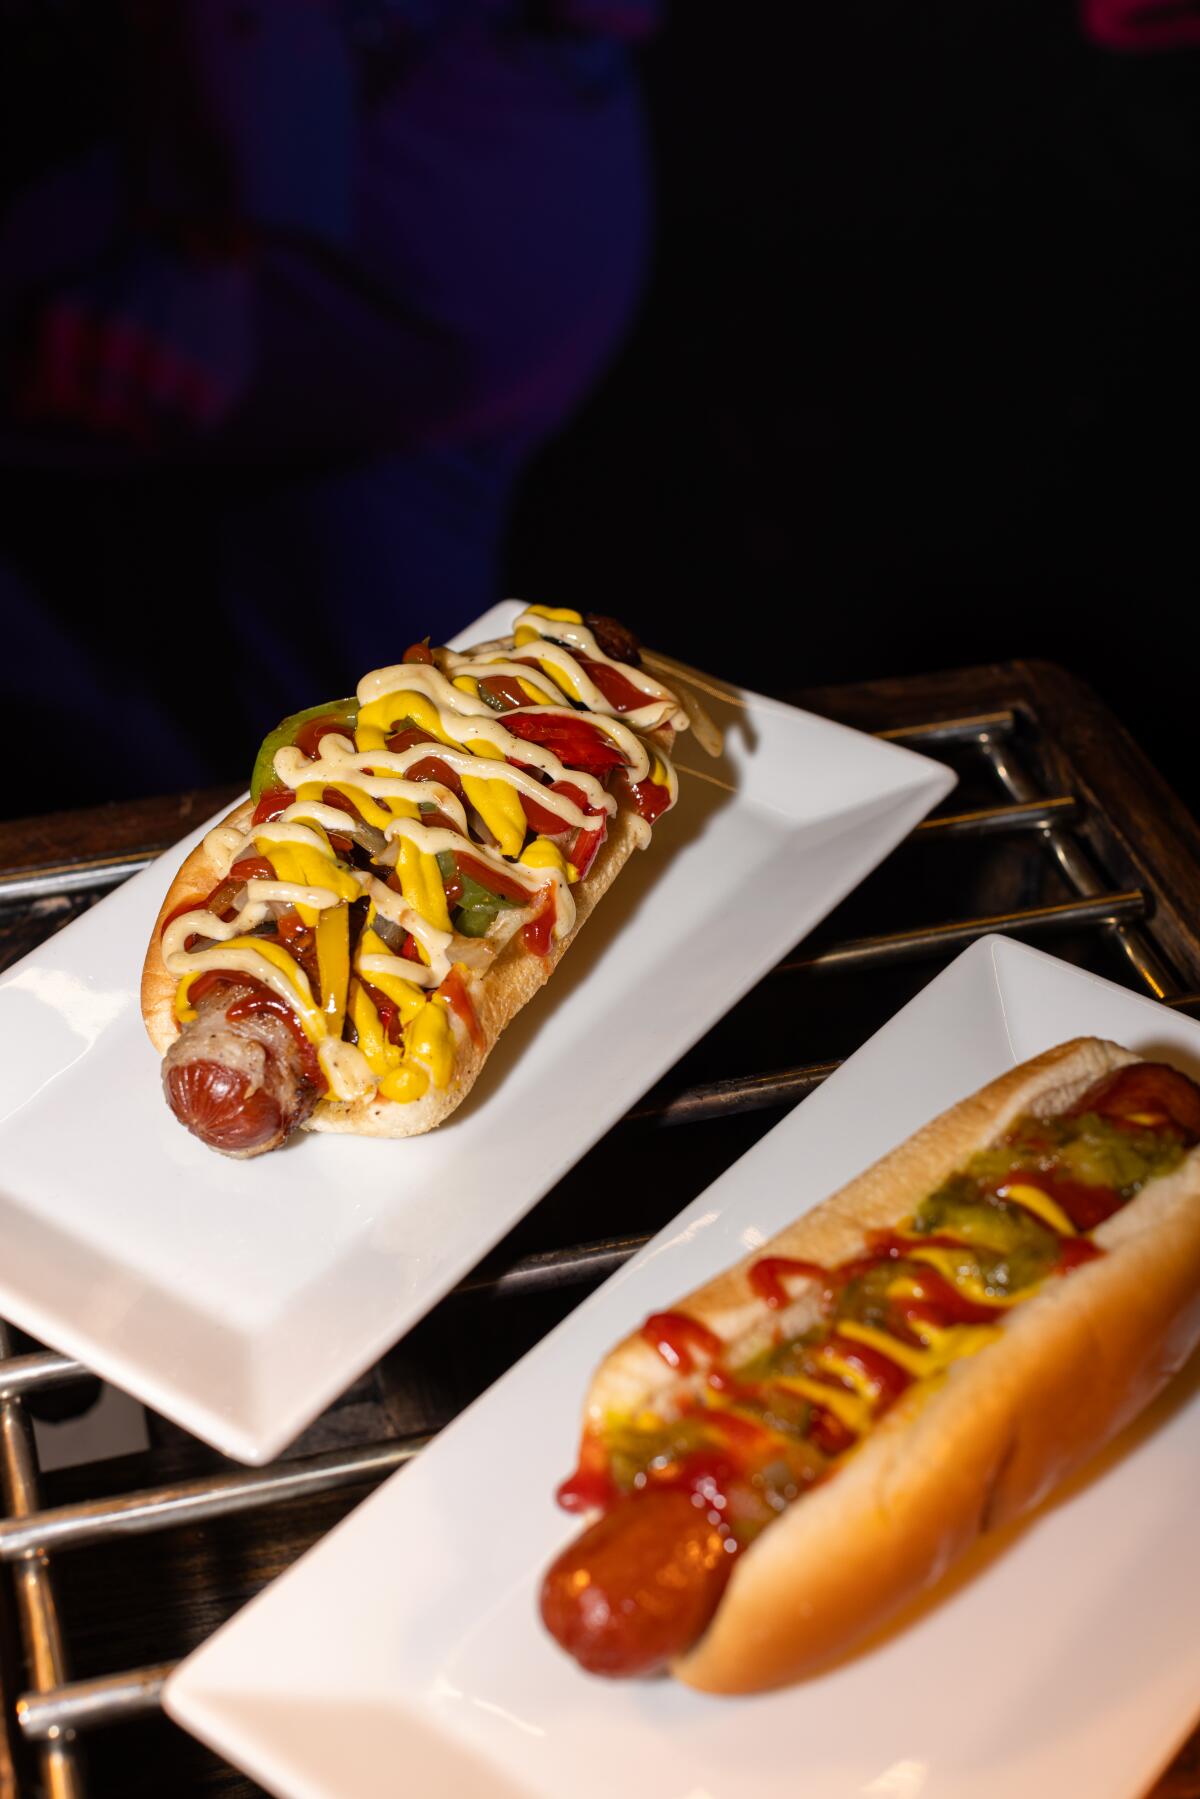 Two hot dogs in buns, side by side, laden with toppings